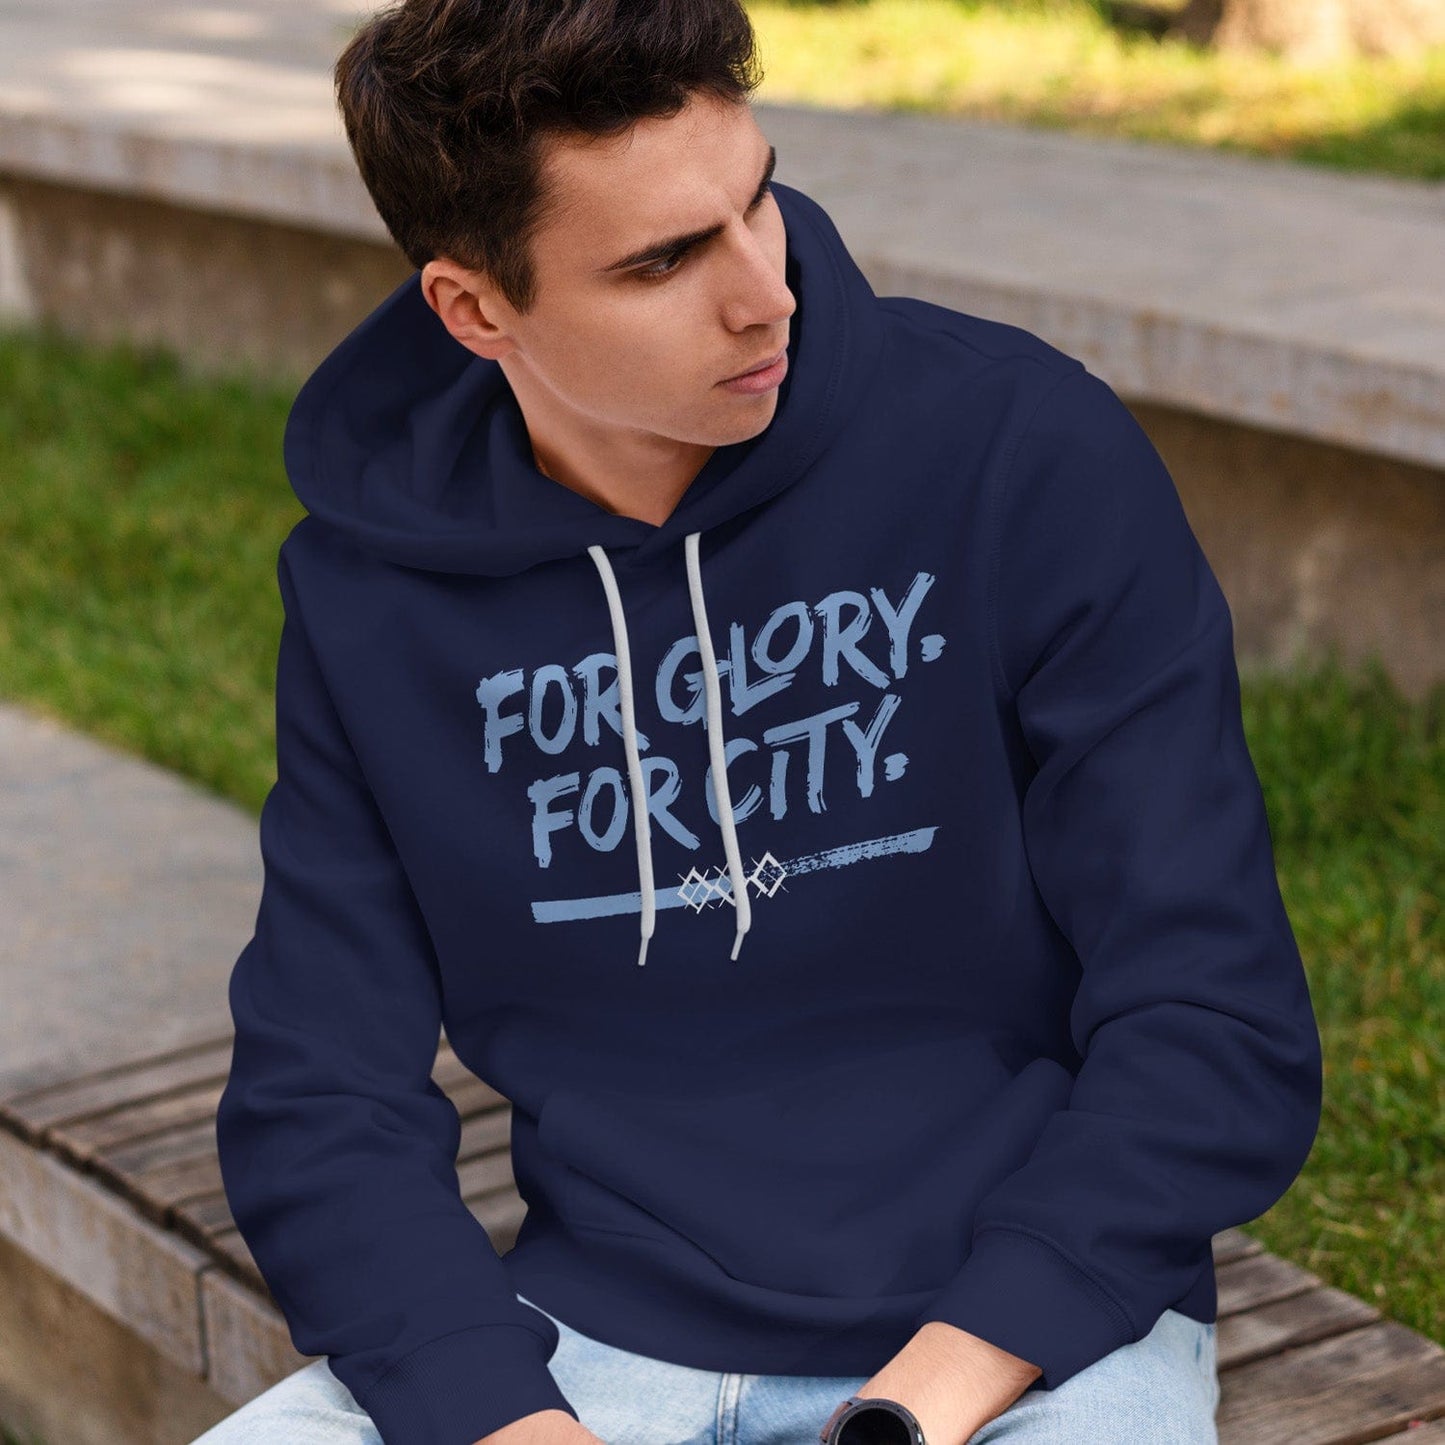 KC Swag Sporting Kansas City navy, powder, white FOR GLORY FOR CITY on navy pullover fleece hoodie worn by male model sitting on bench in public park